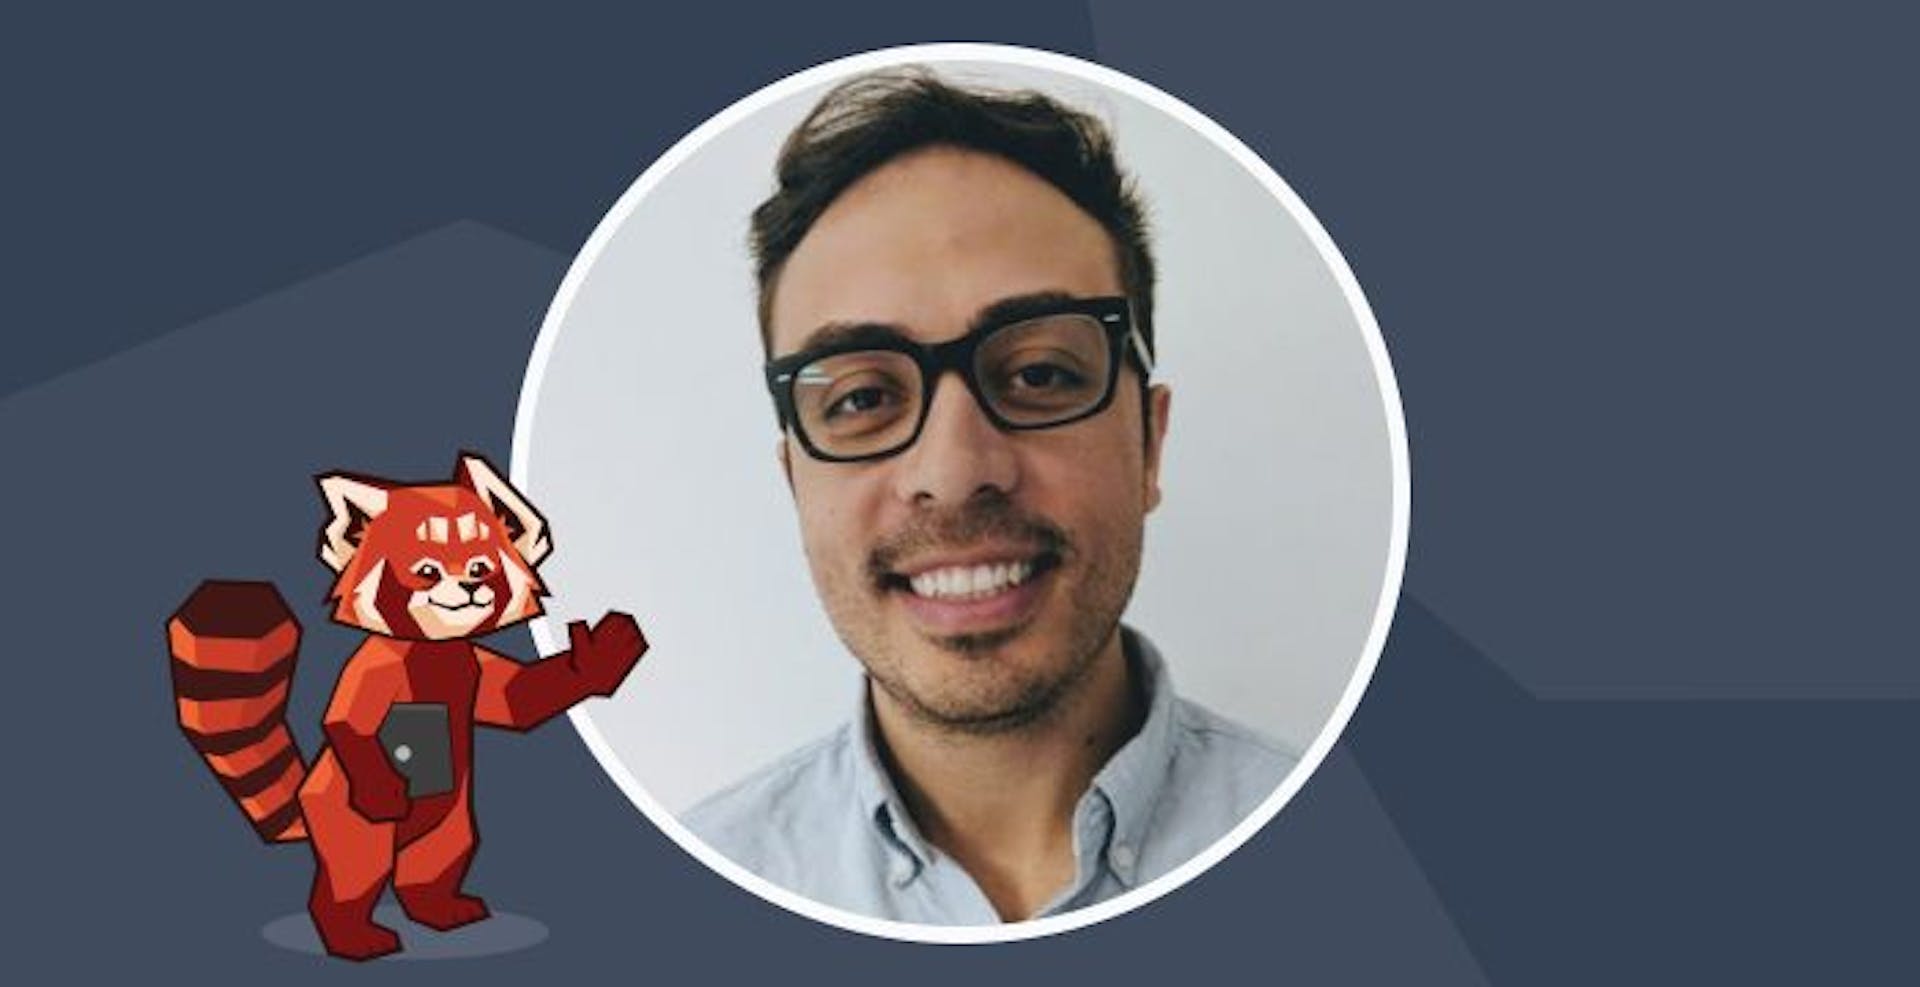 featured image - Redpanda Lands a $100M Series C Funding Round - Interview With Alex Gallego